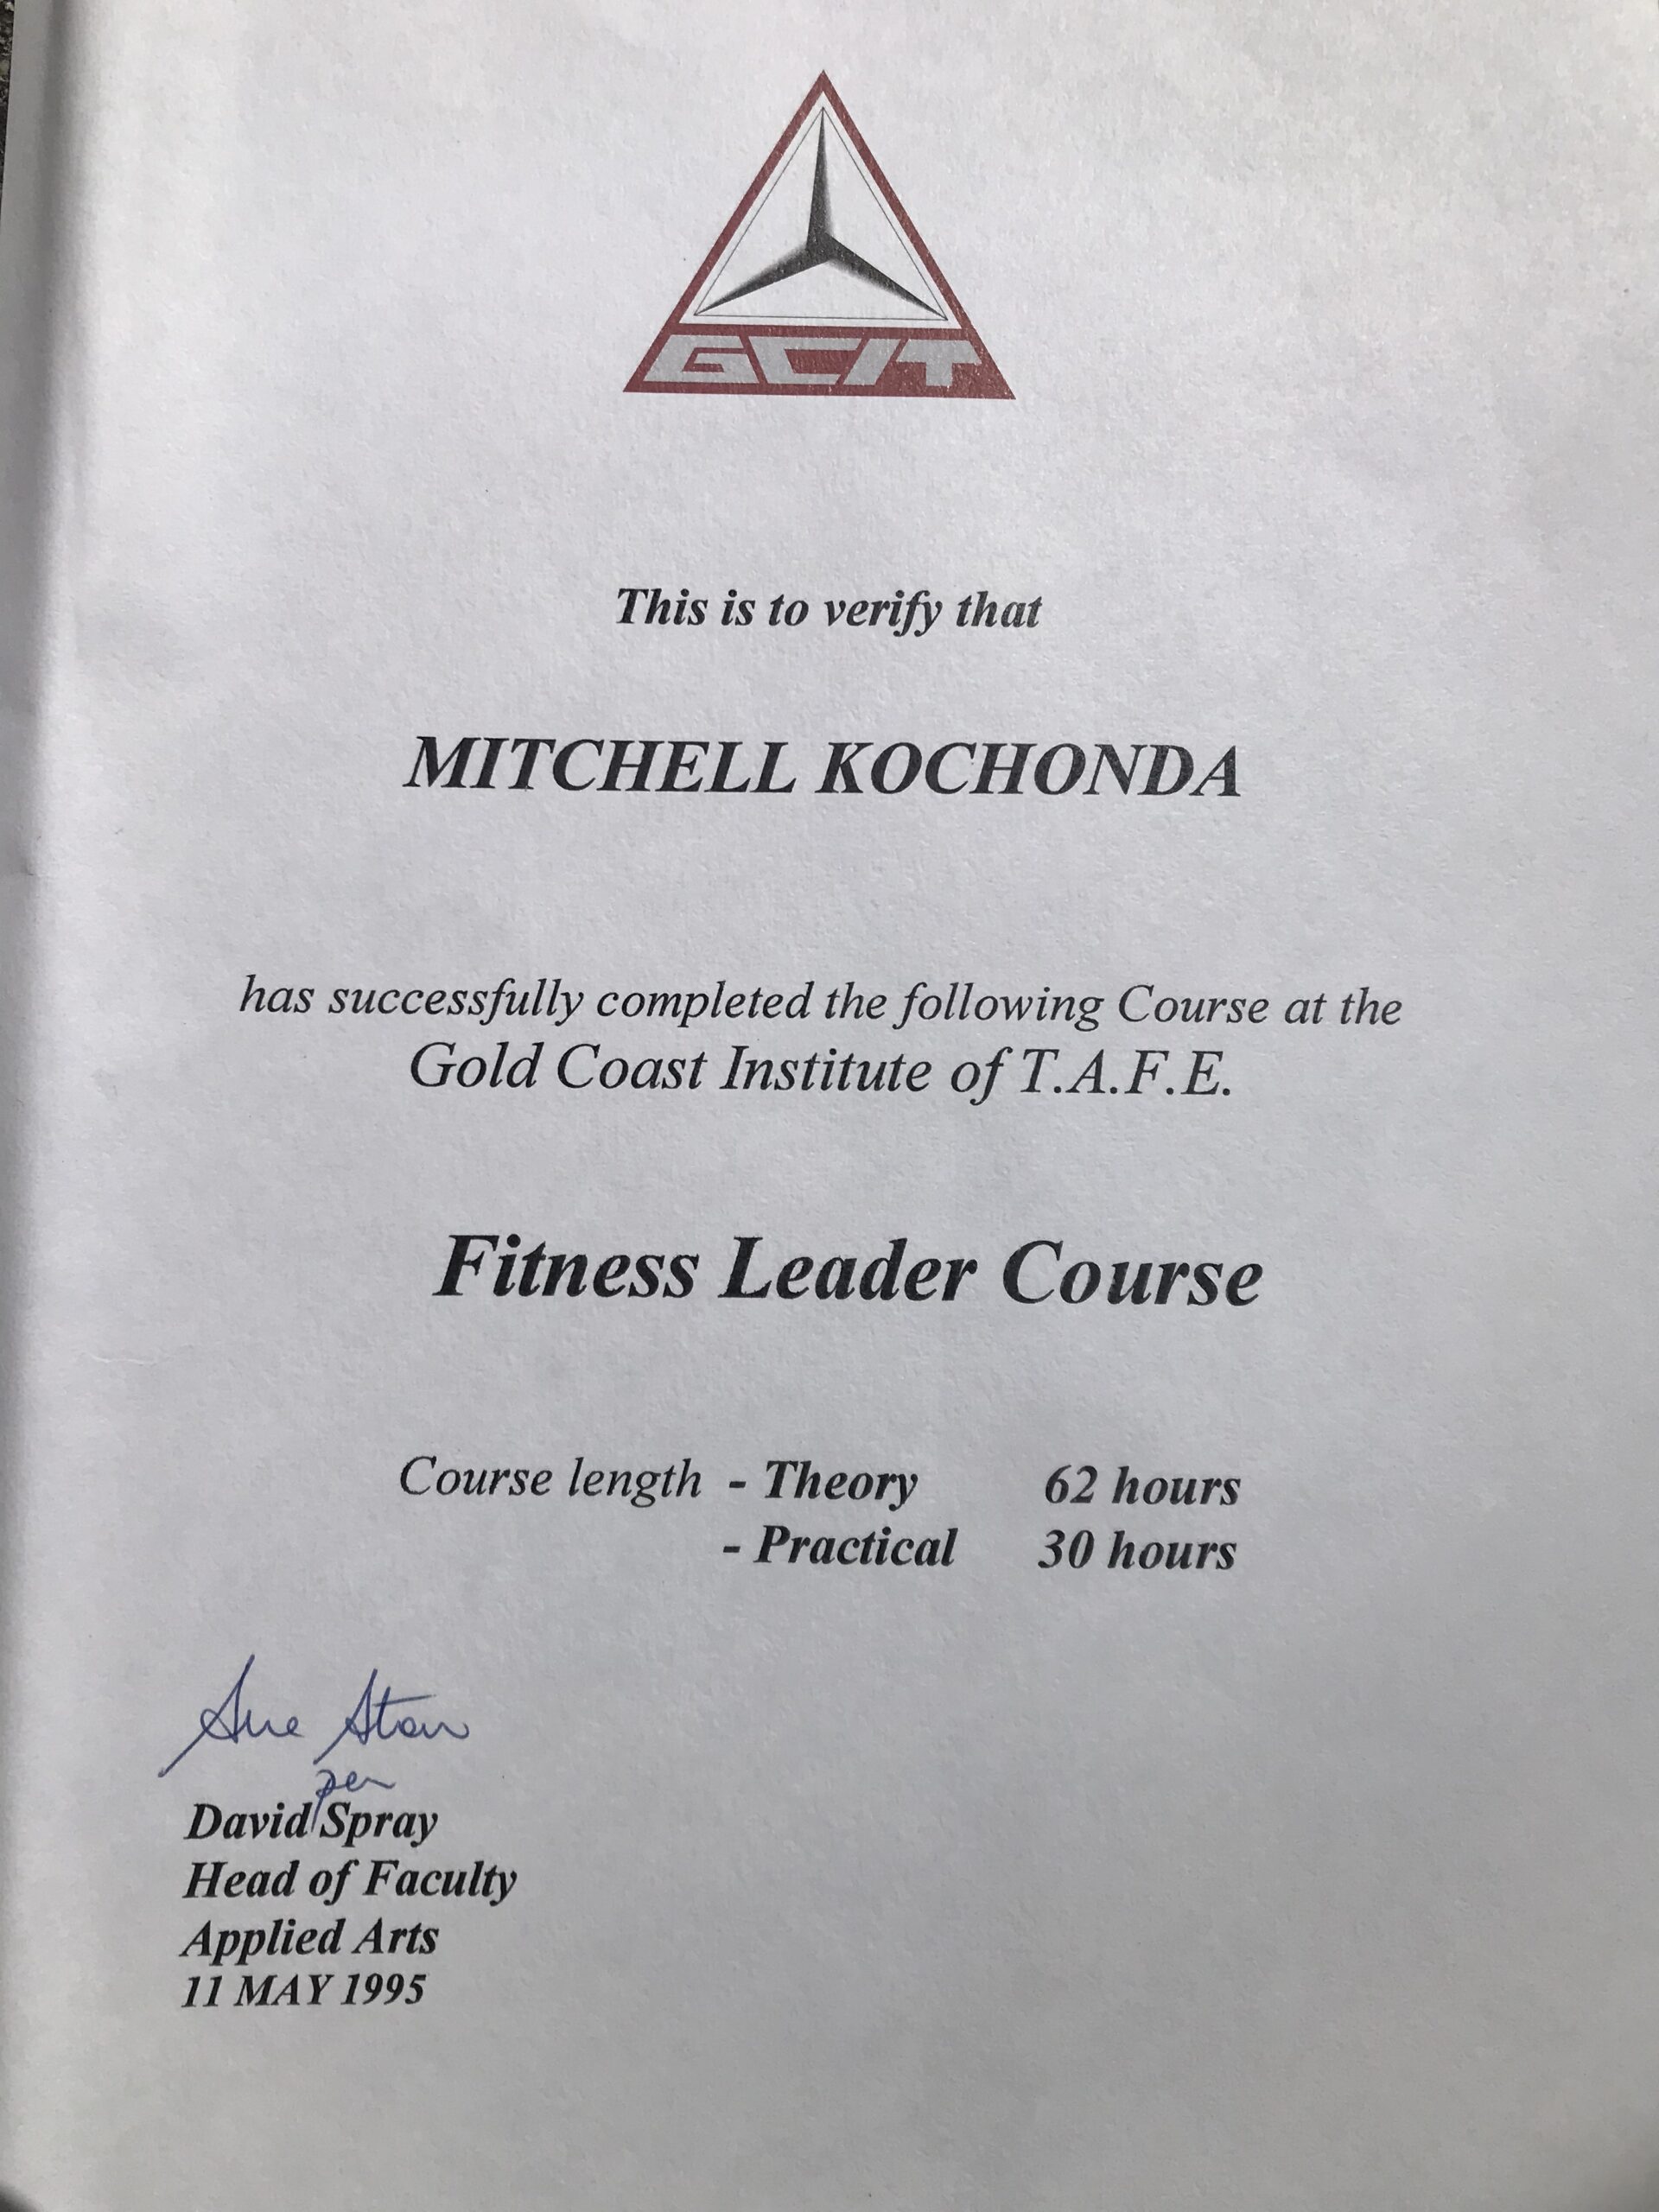 This was the course to work in gyms in Queensland the mid 1990's.
It's here I first heard 'athletes don't need more protein' and 'you only need to do one set to failure in the gym' and other interesting paradigms of the time.   